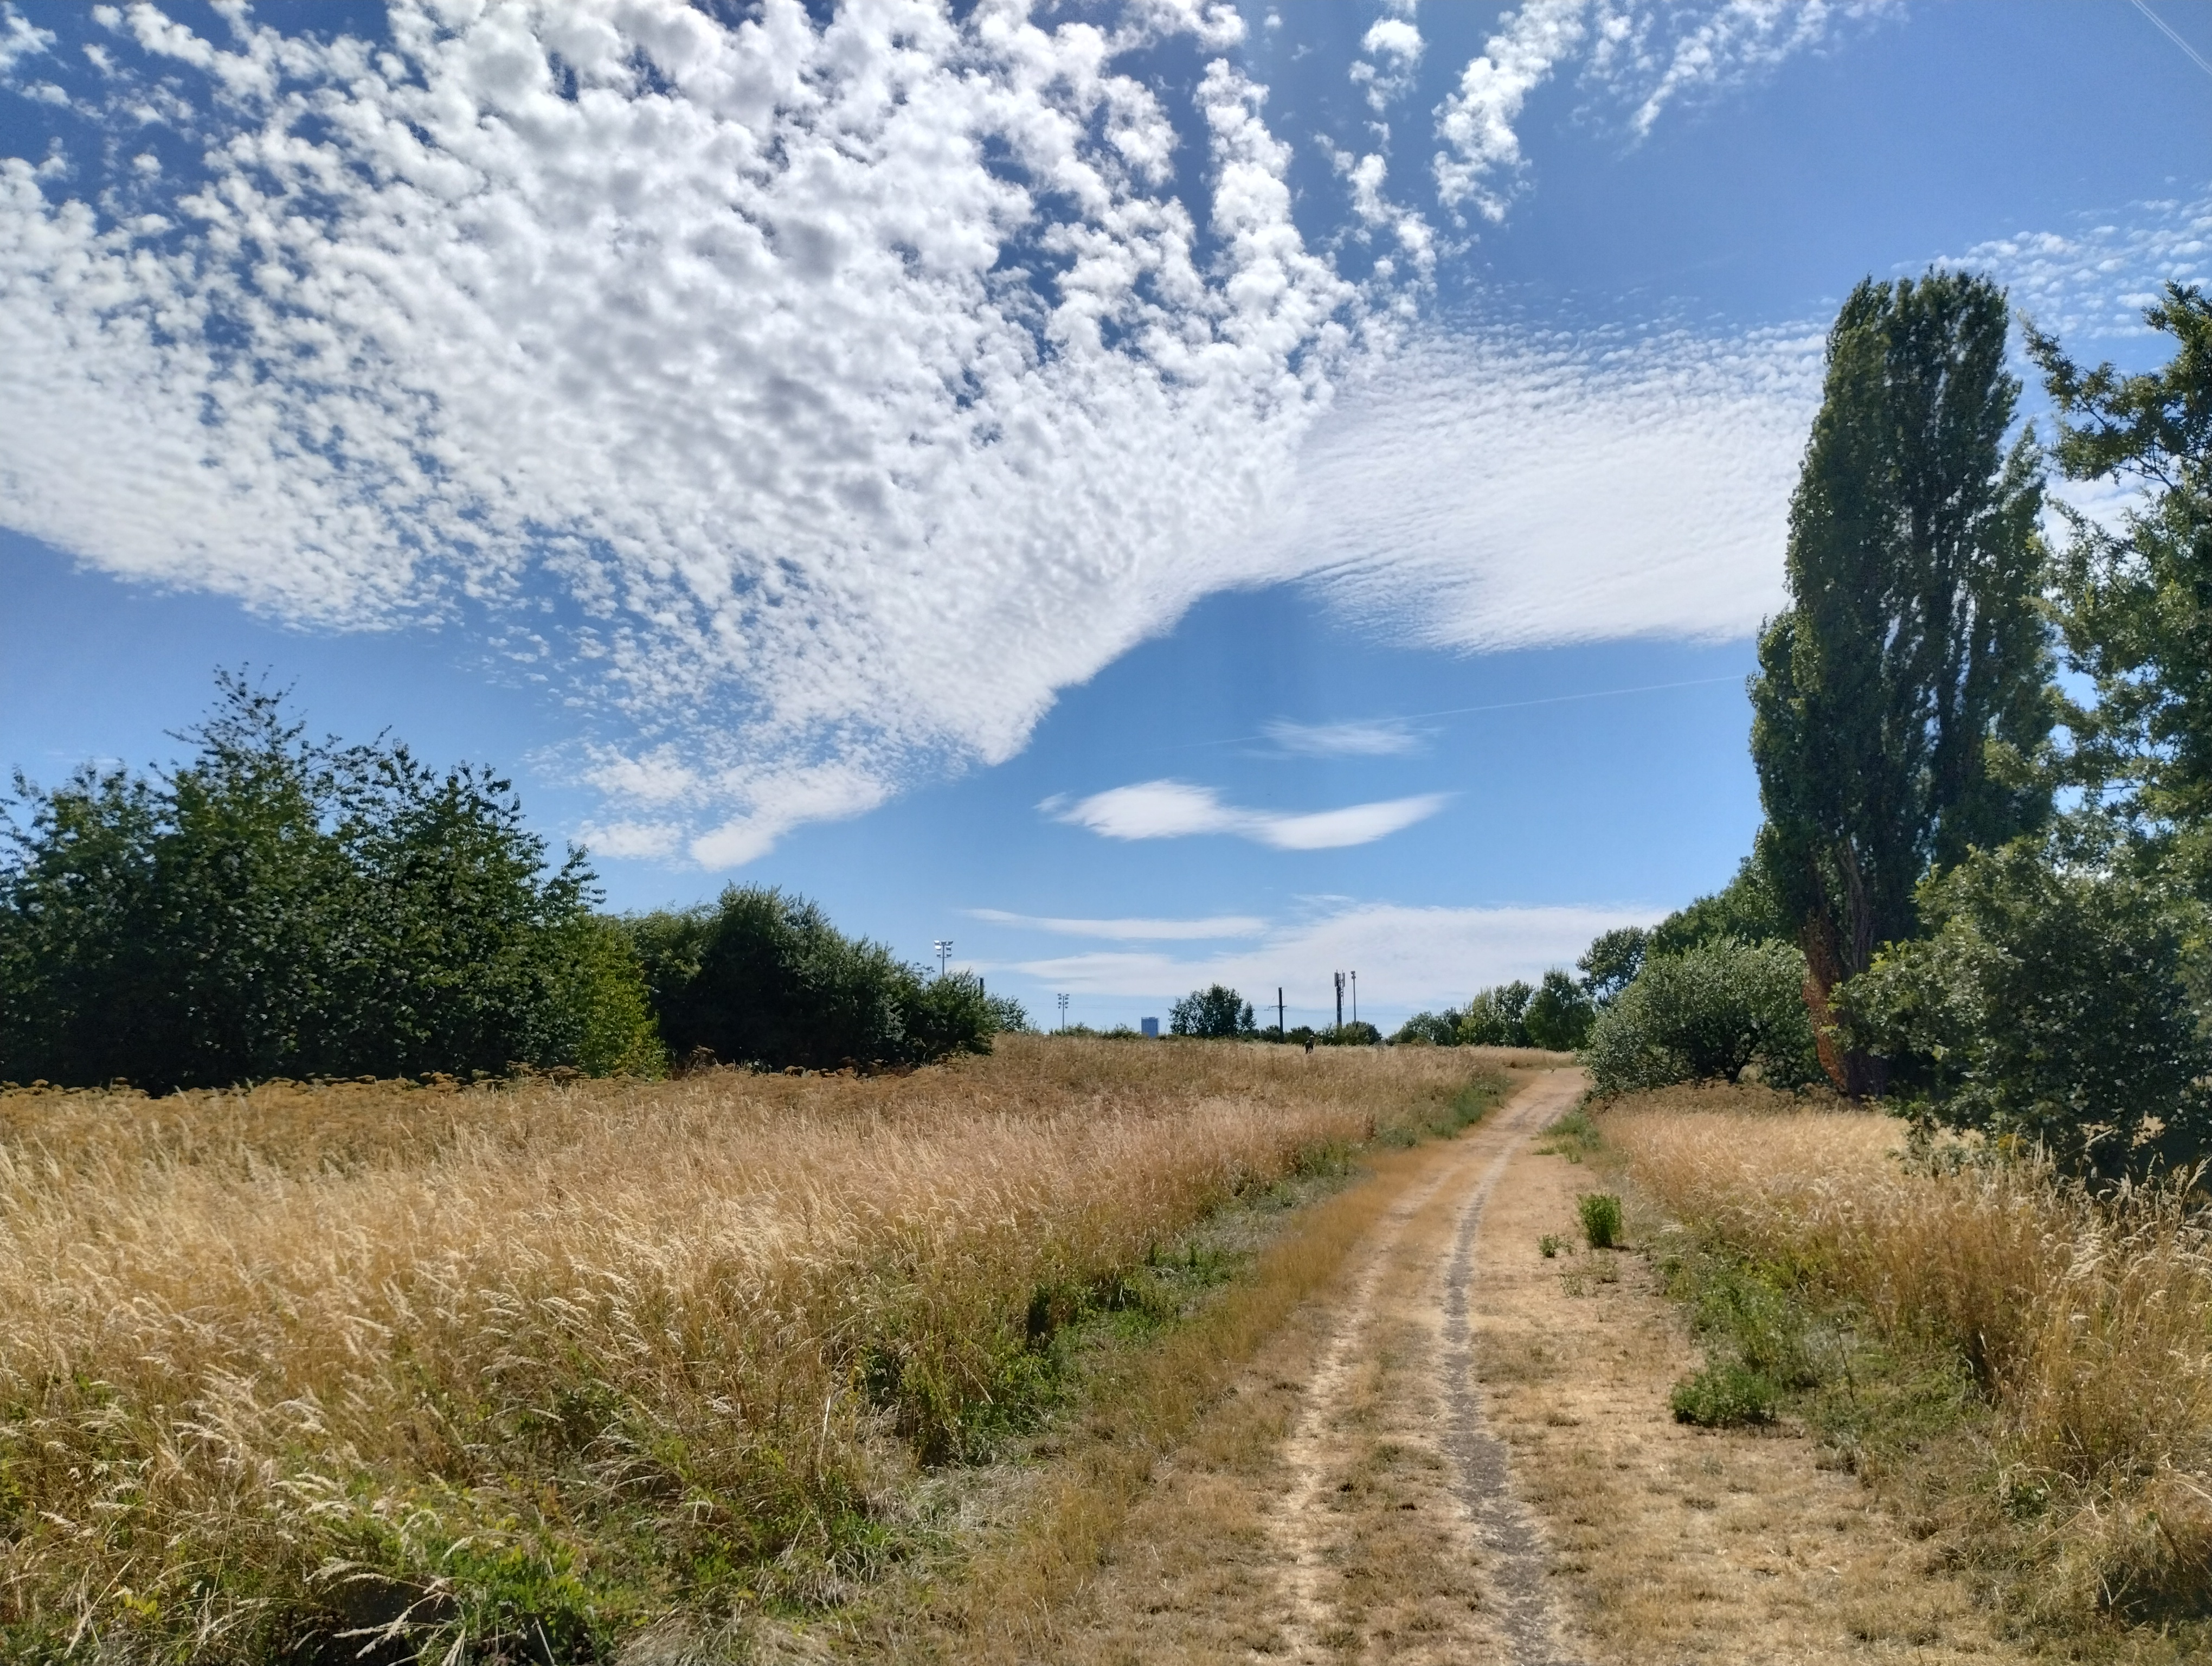 Motorola Moto G82 camera sample: In scenes such as this, you can see the strength of the Auto HDR software, which keeps the foreground bright without blowing out those lovely cloud textures.